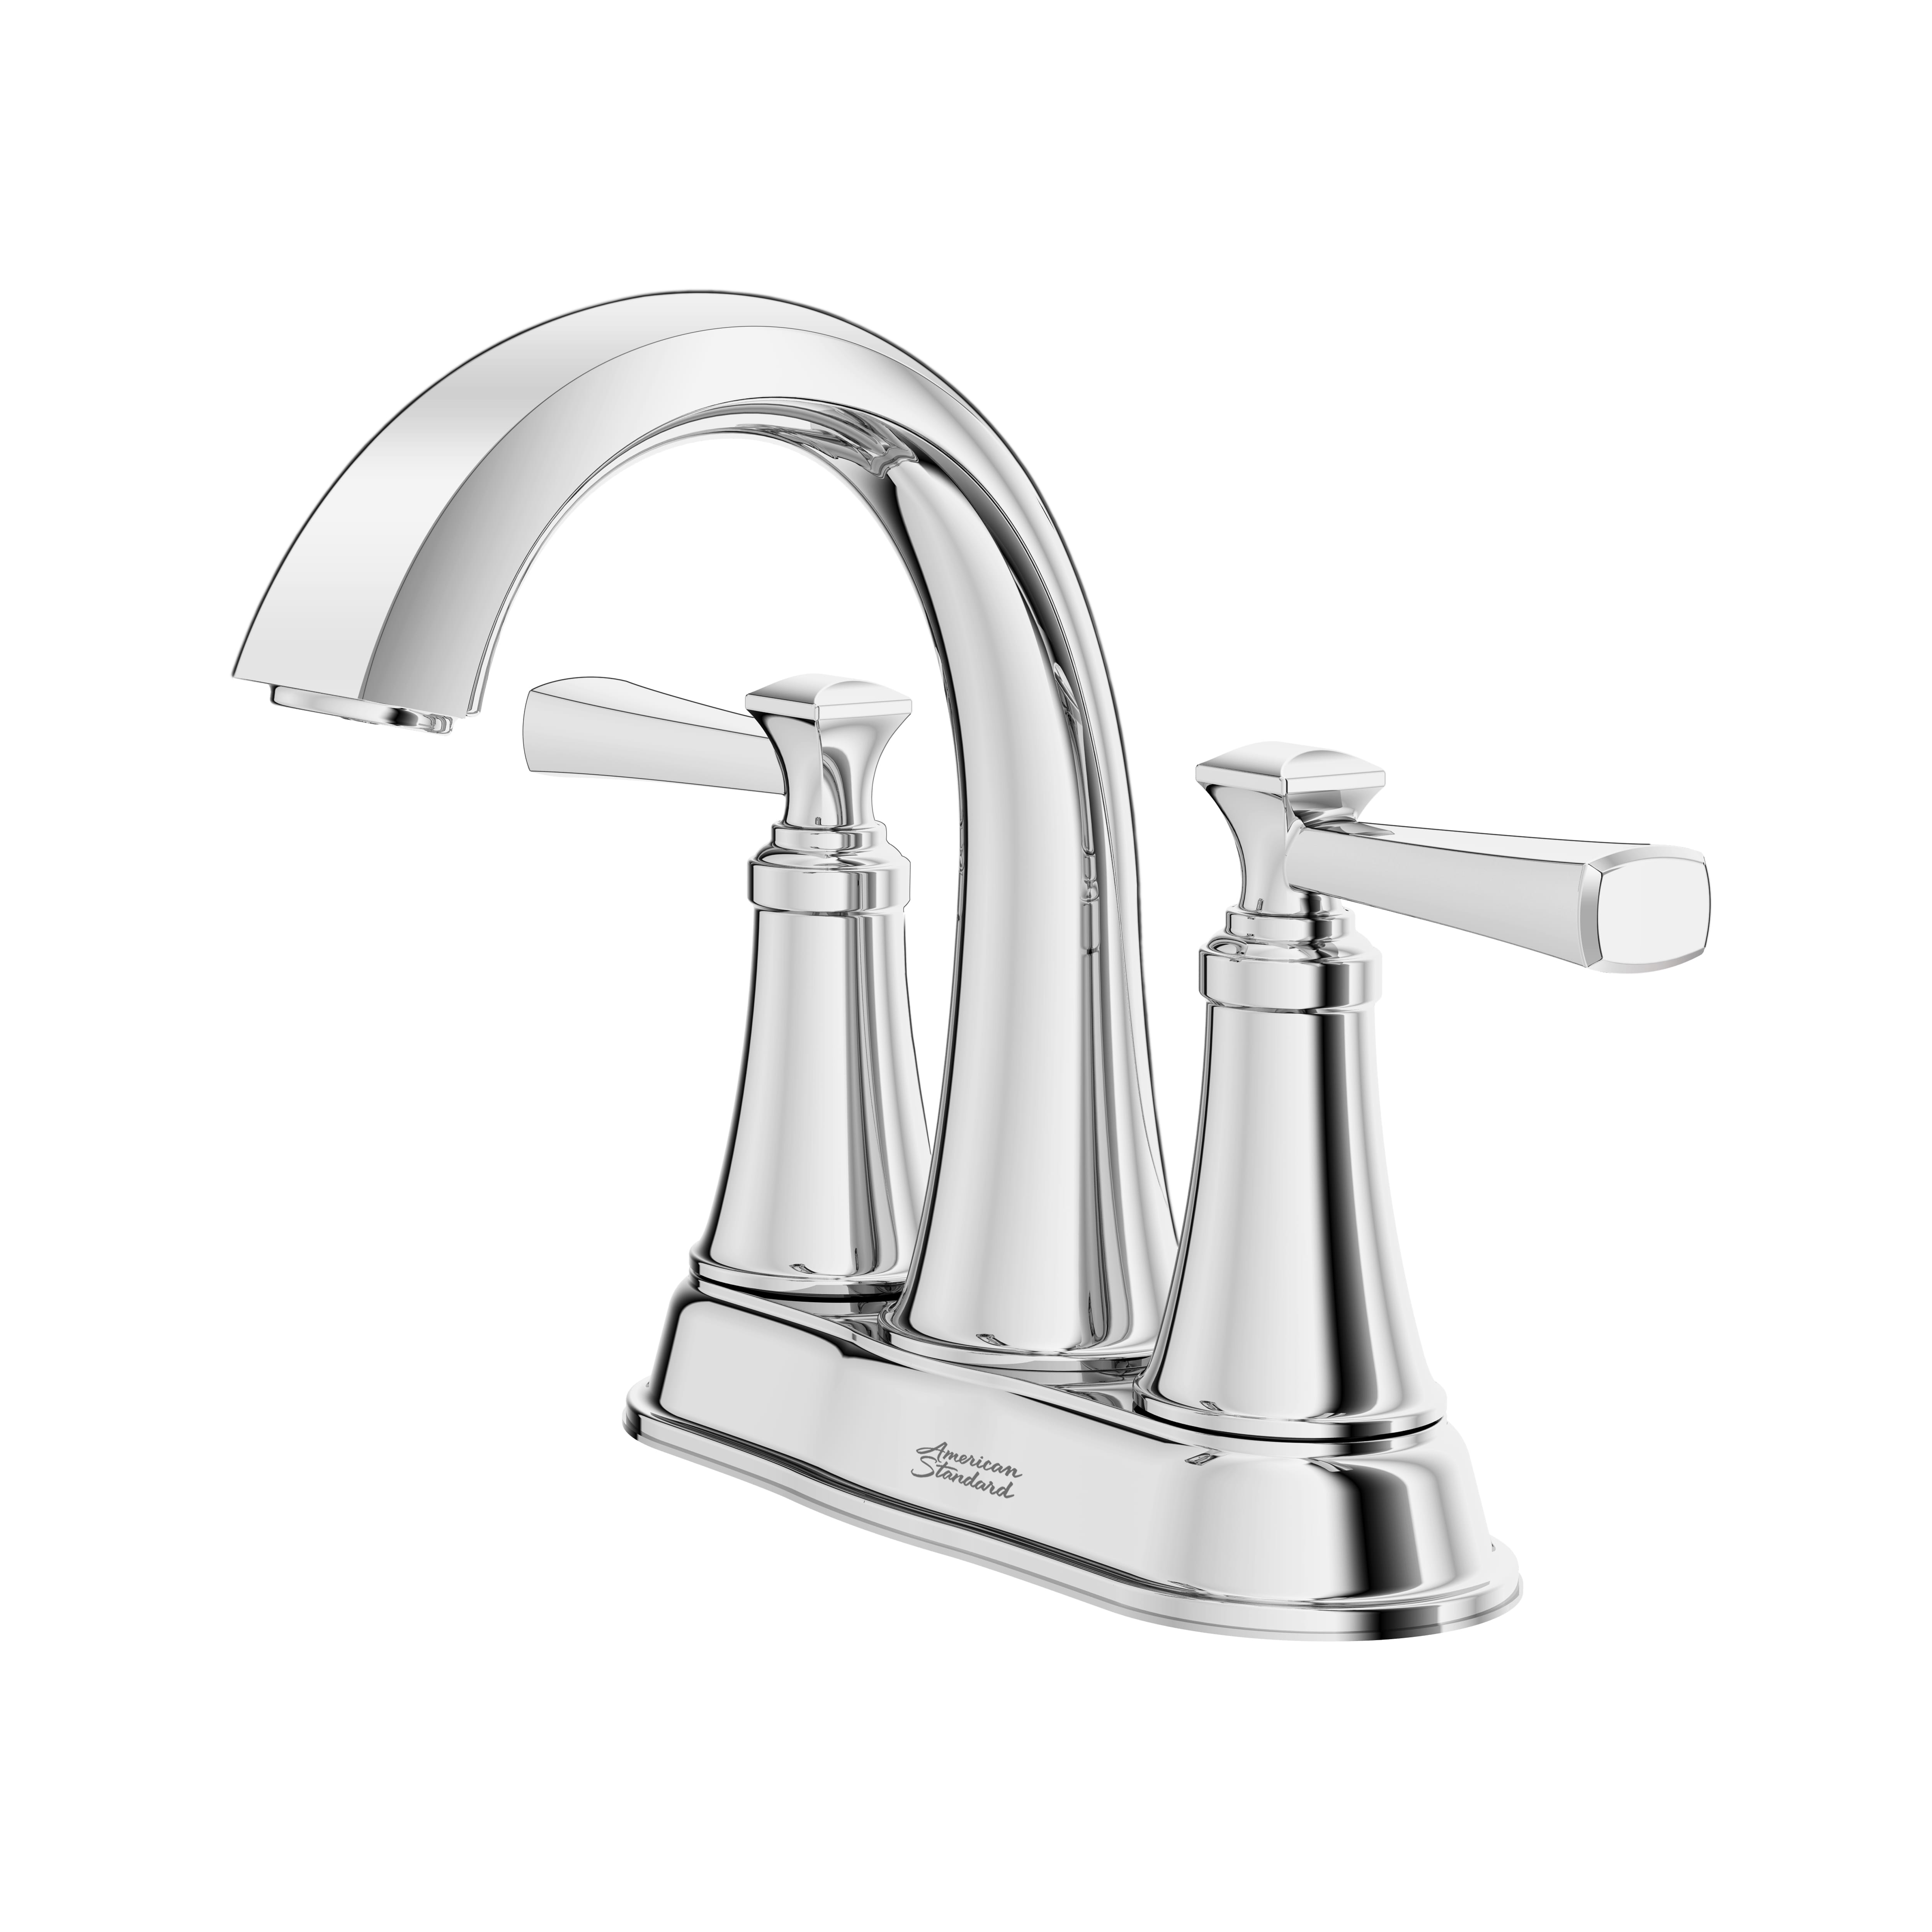 Rumson 4-In. Centerset 2-Handle Bathroom Faucet 1.2 GPM with Lever Handles